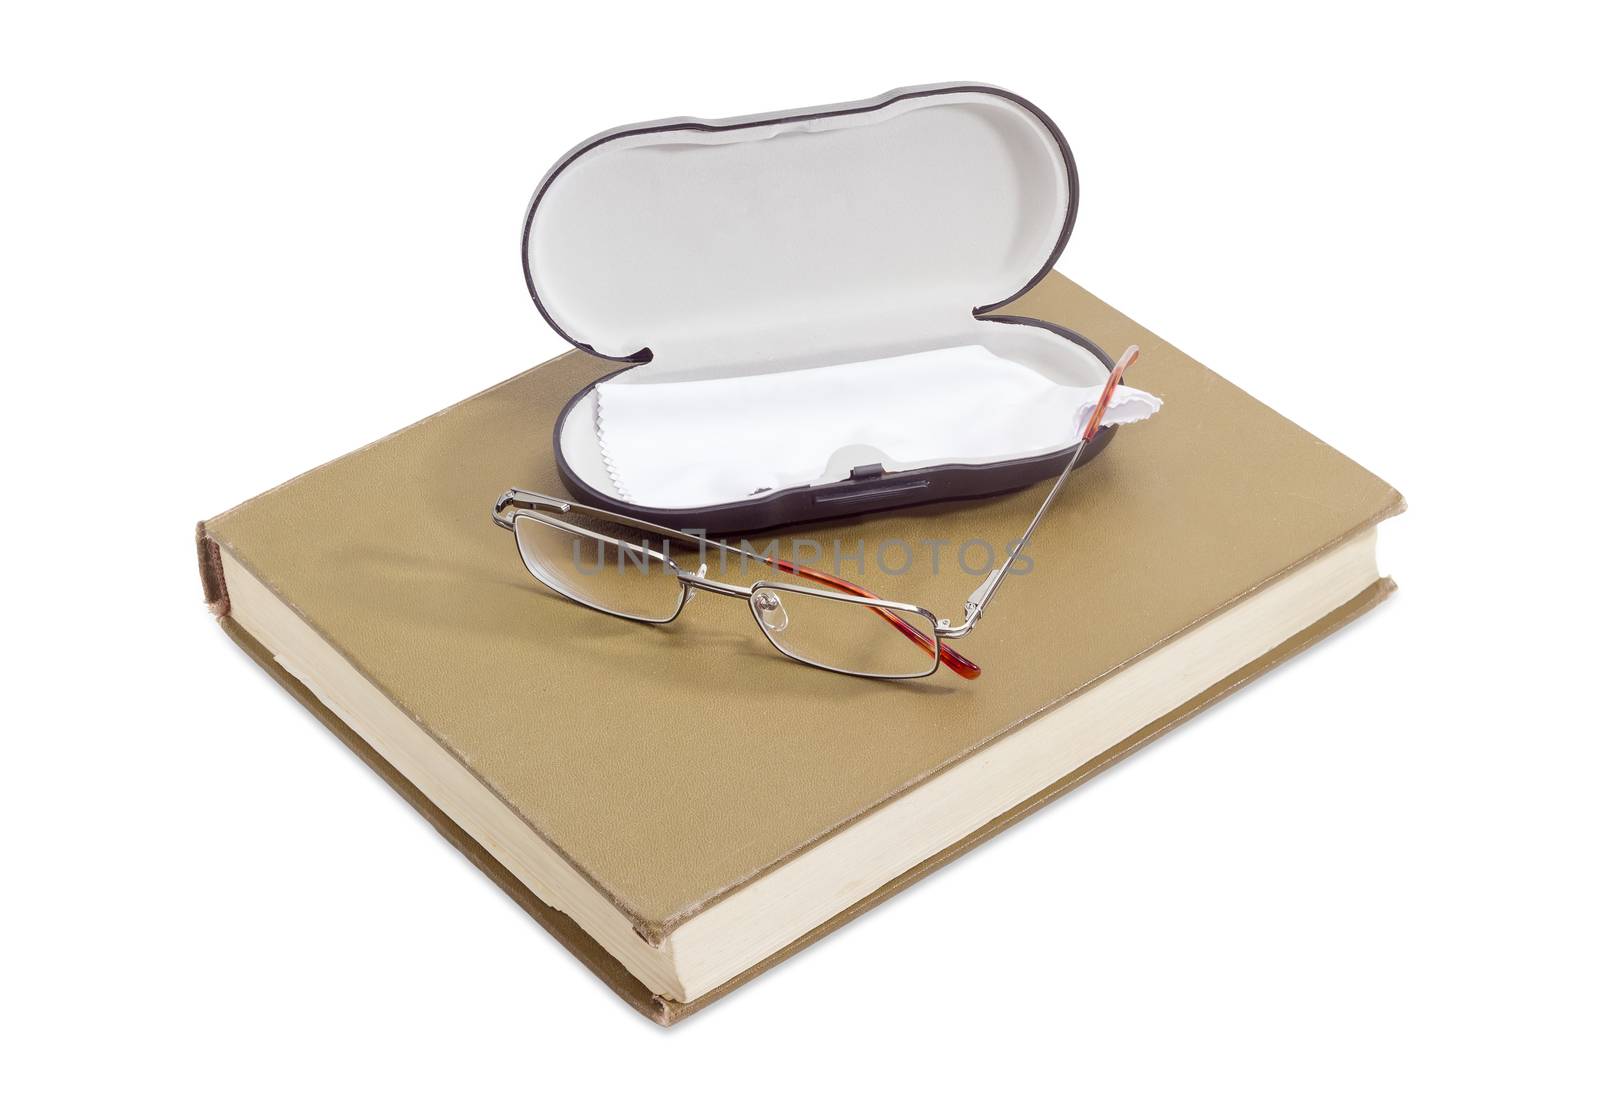 Modern classic men's eyeglasses and case on the book